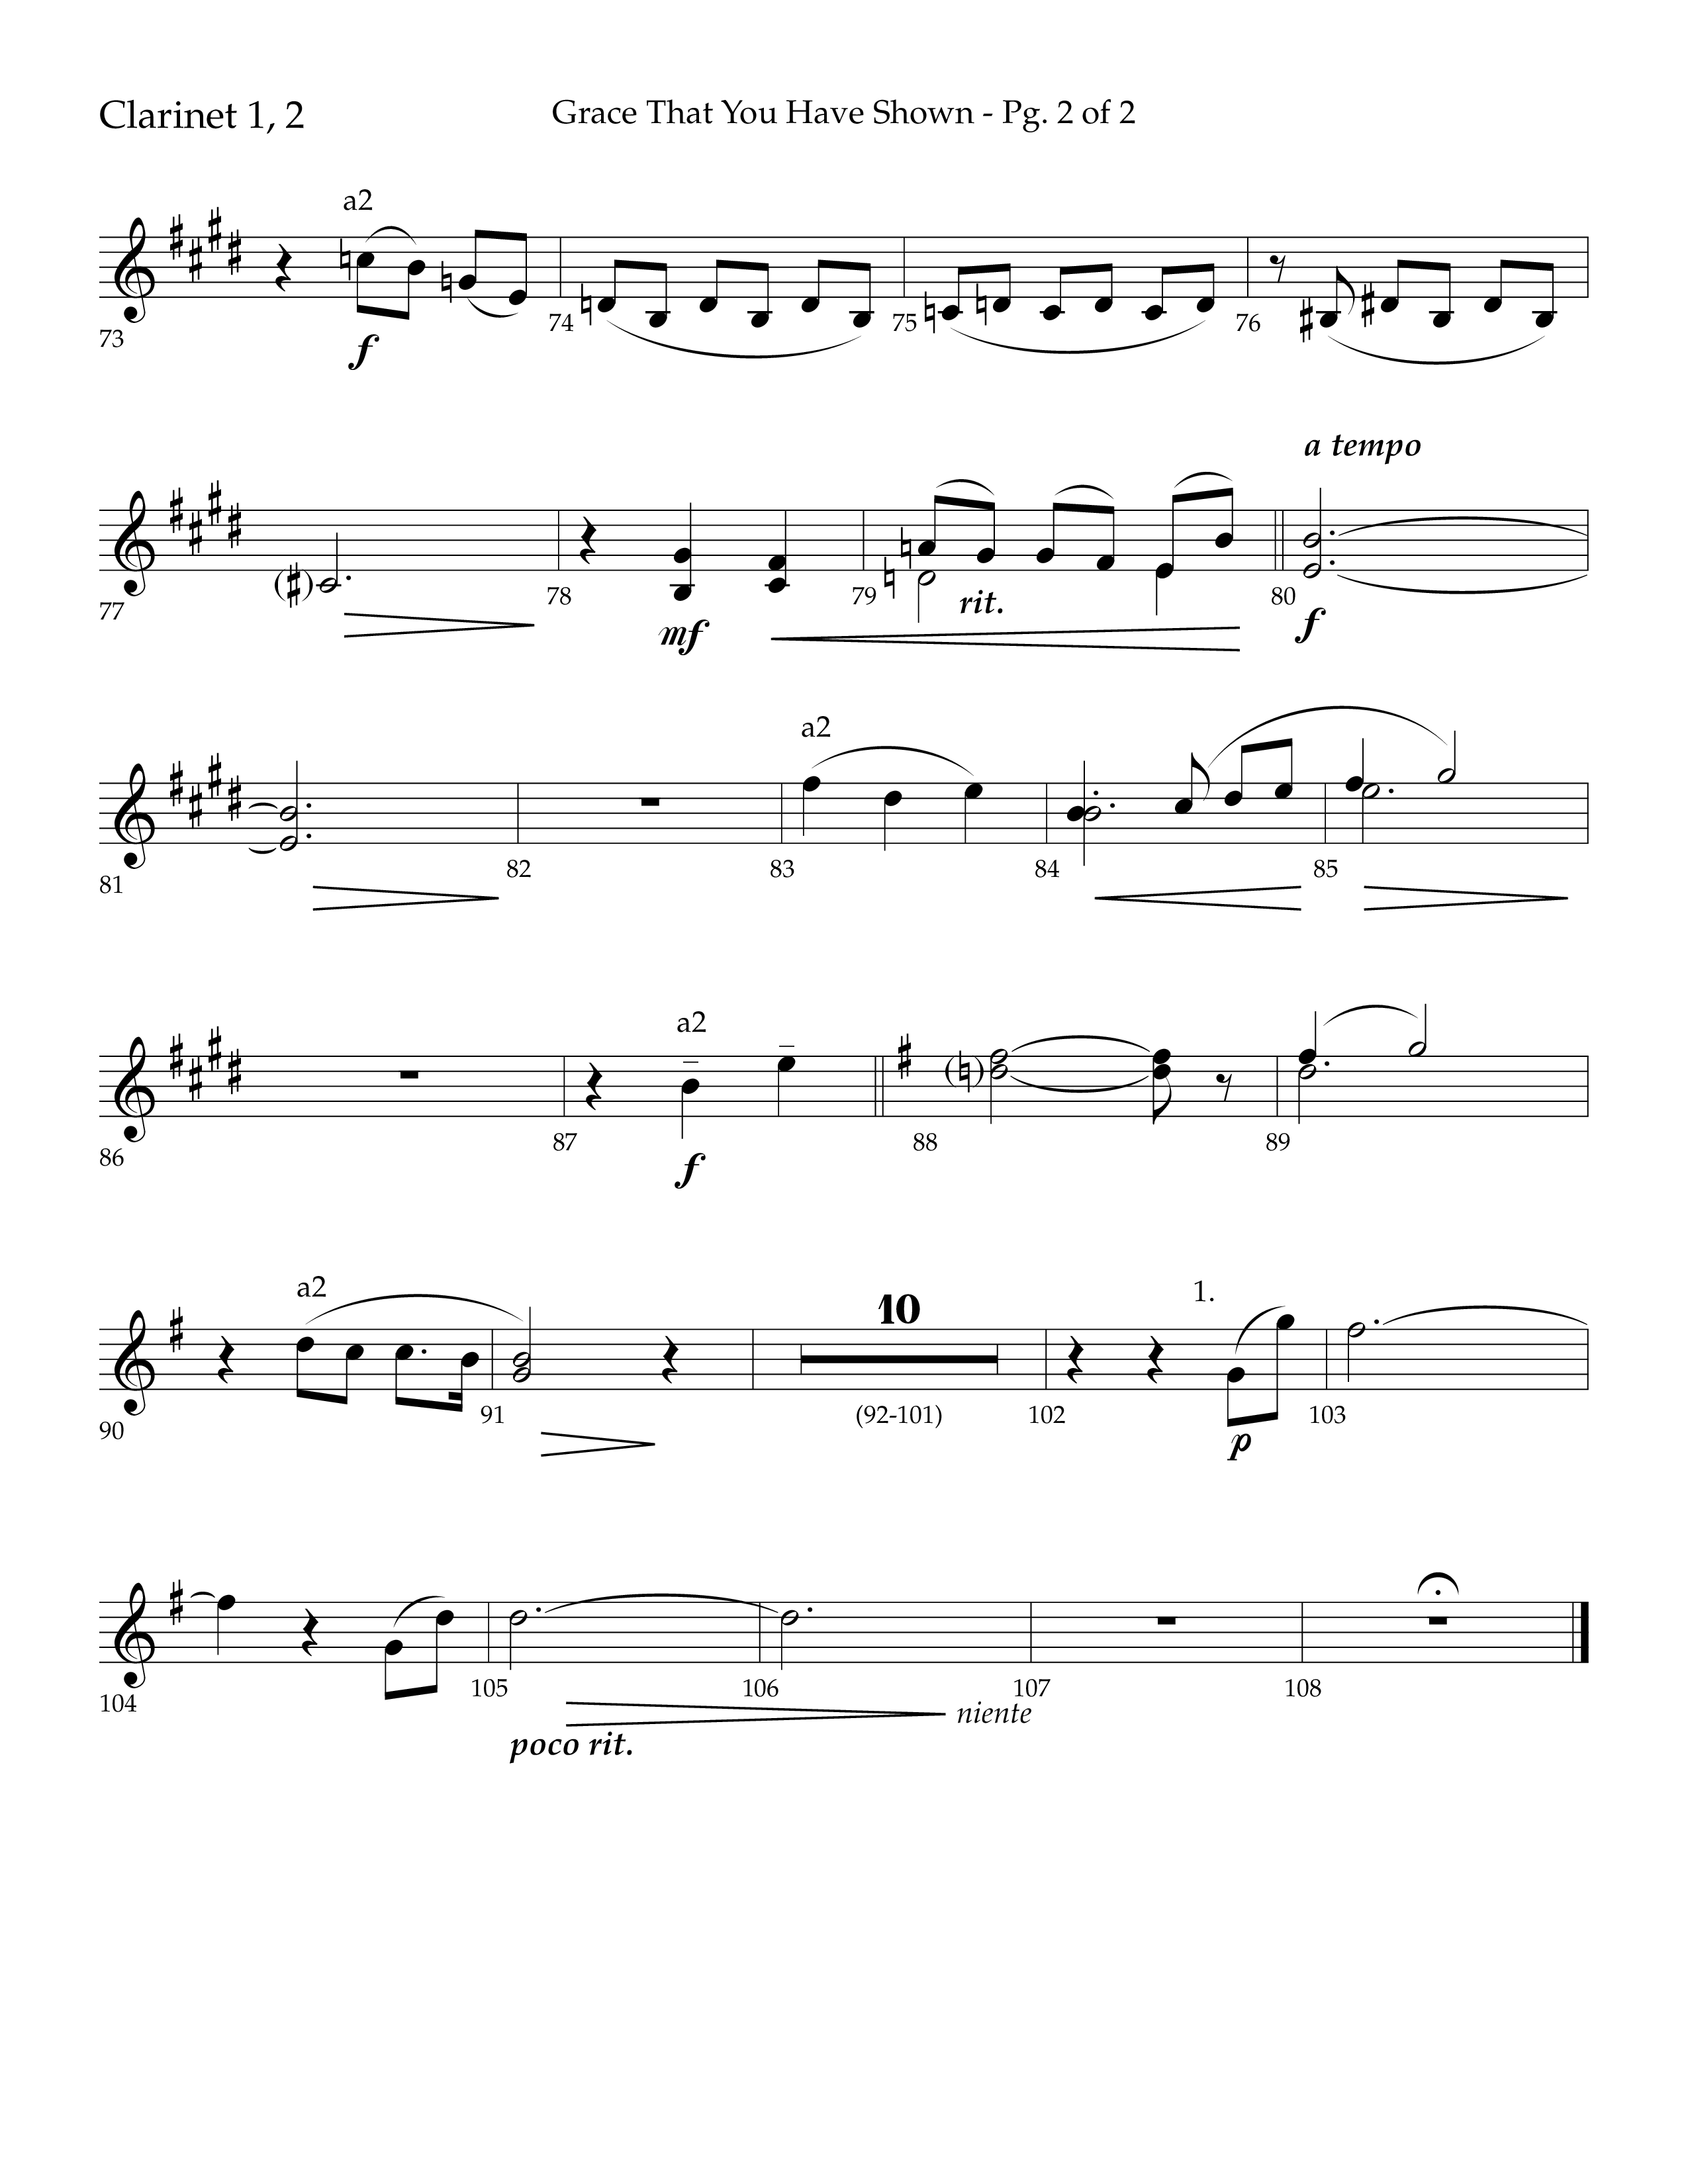 Grace That You Have Shown (Choral Anthem SATB) Clarinet 1/2 (Lifeway Choral / Arr. Phillip Keveren / Orch. Danny Mitchell)